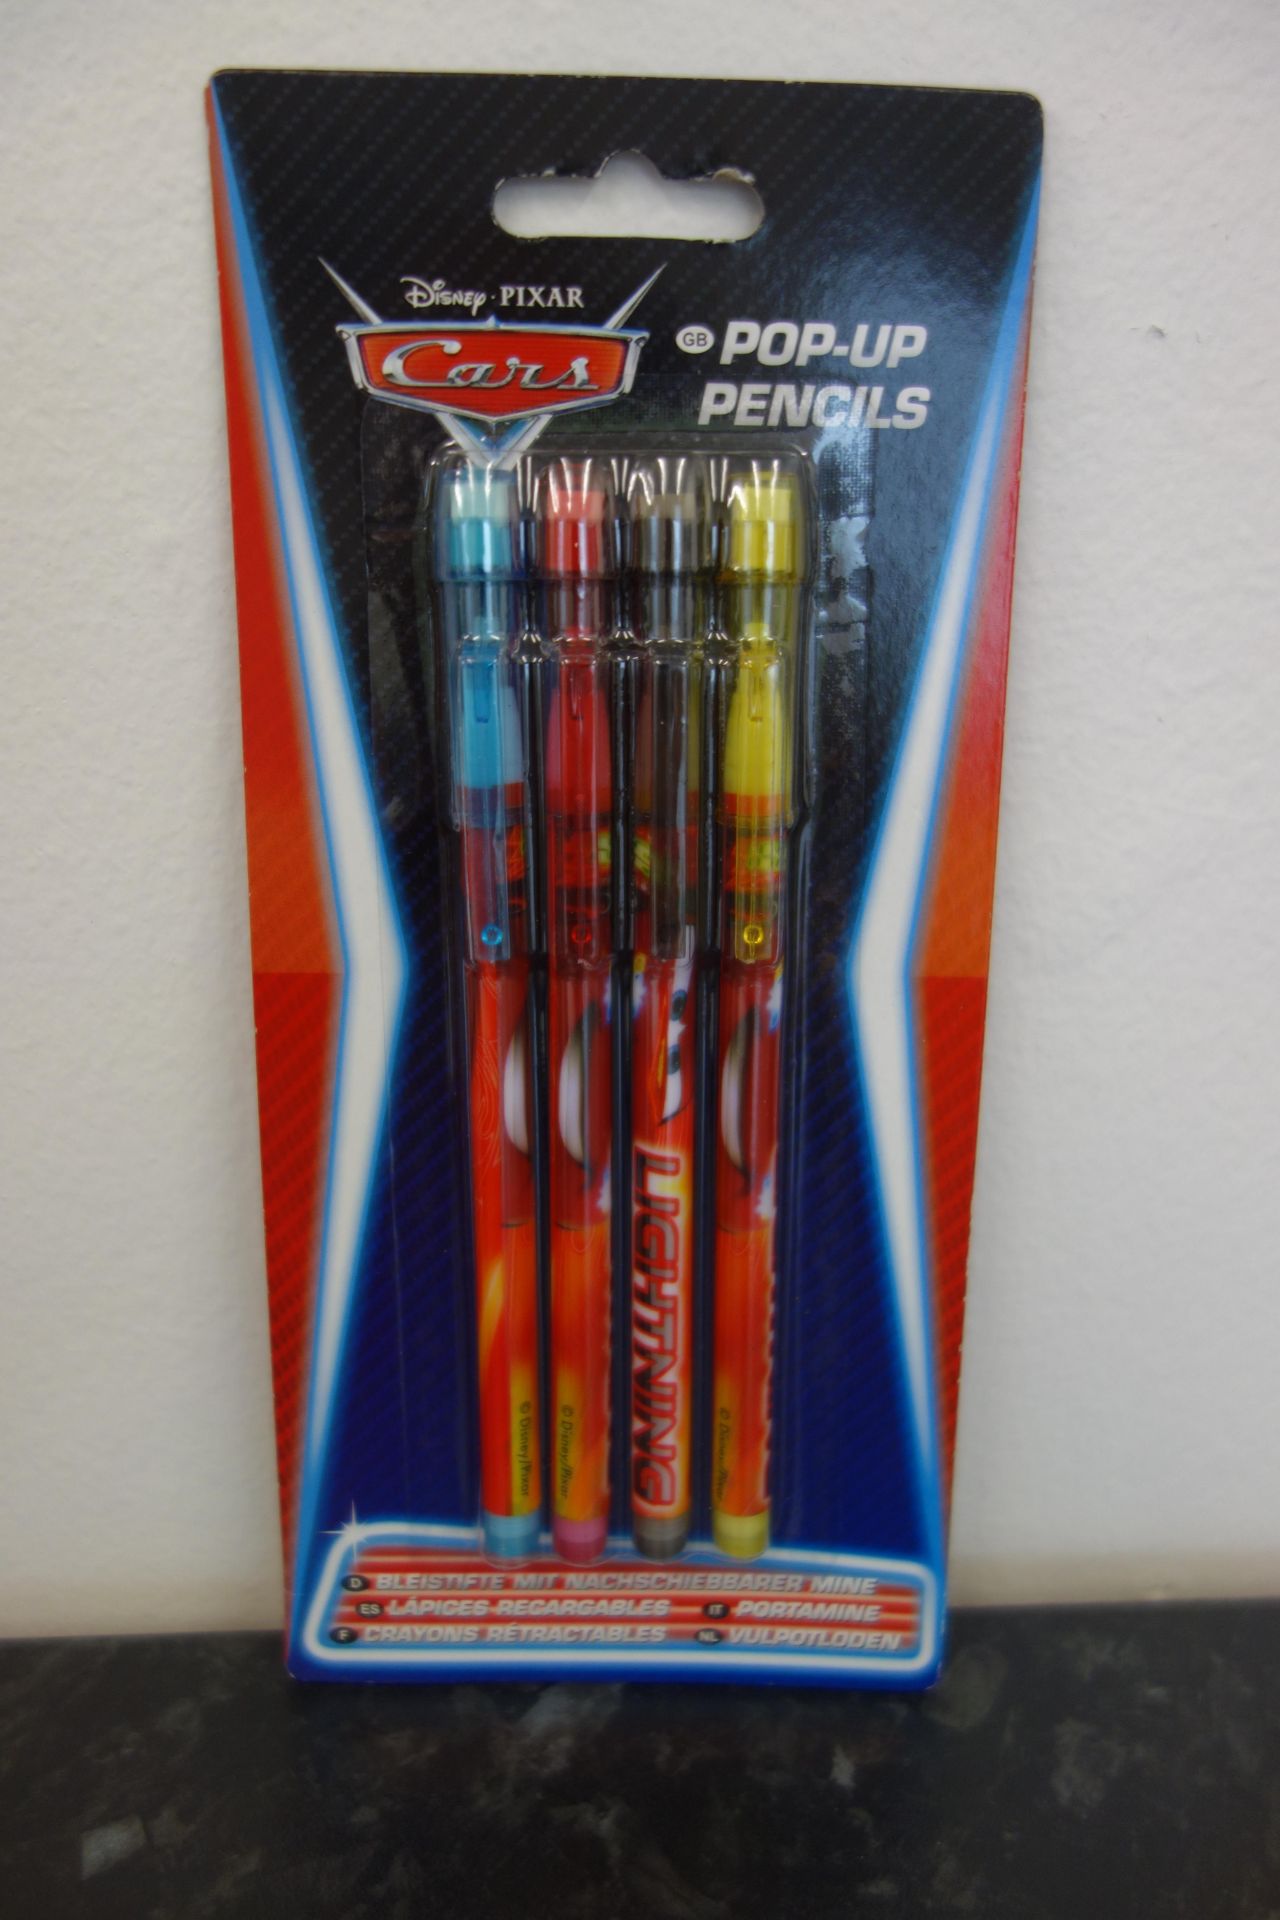 72 x Brand New - 4 Pack Disney Pixar Cars Pop-Up Pencils with Erasers